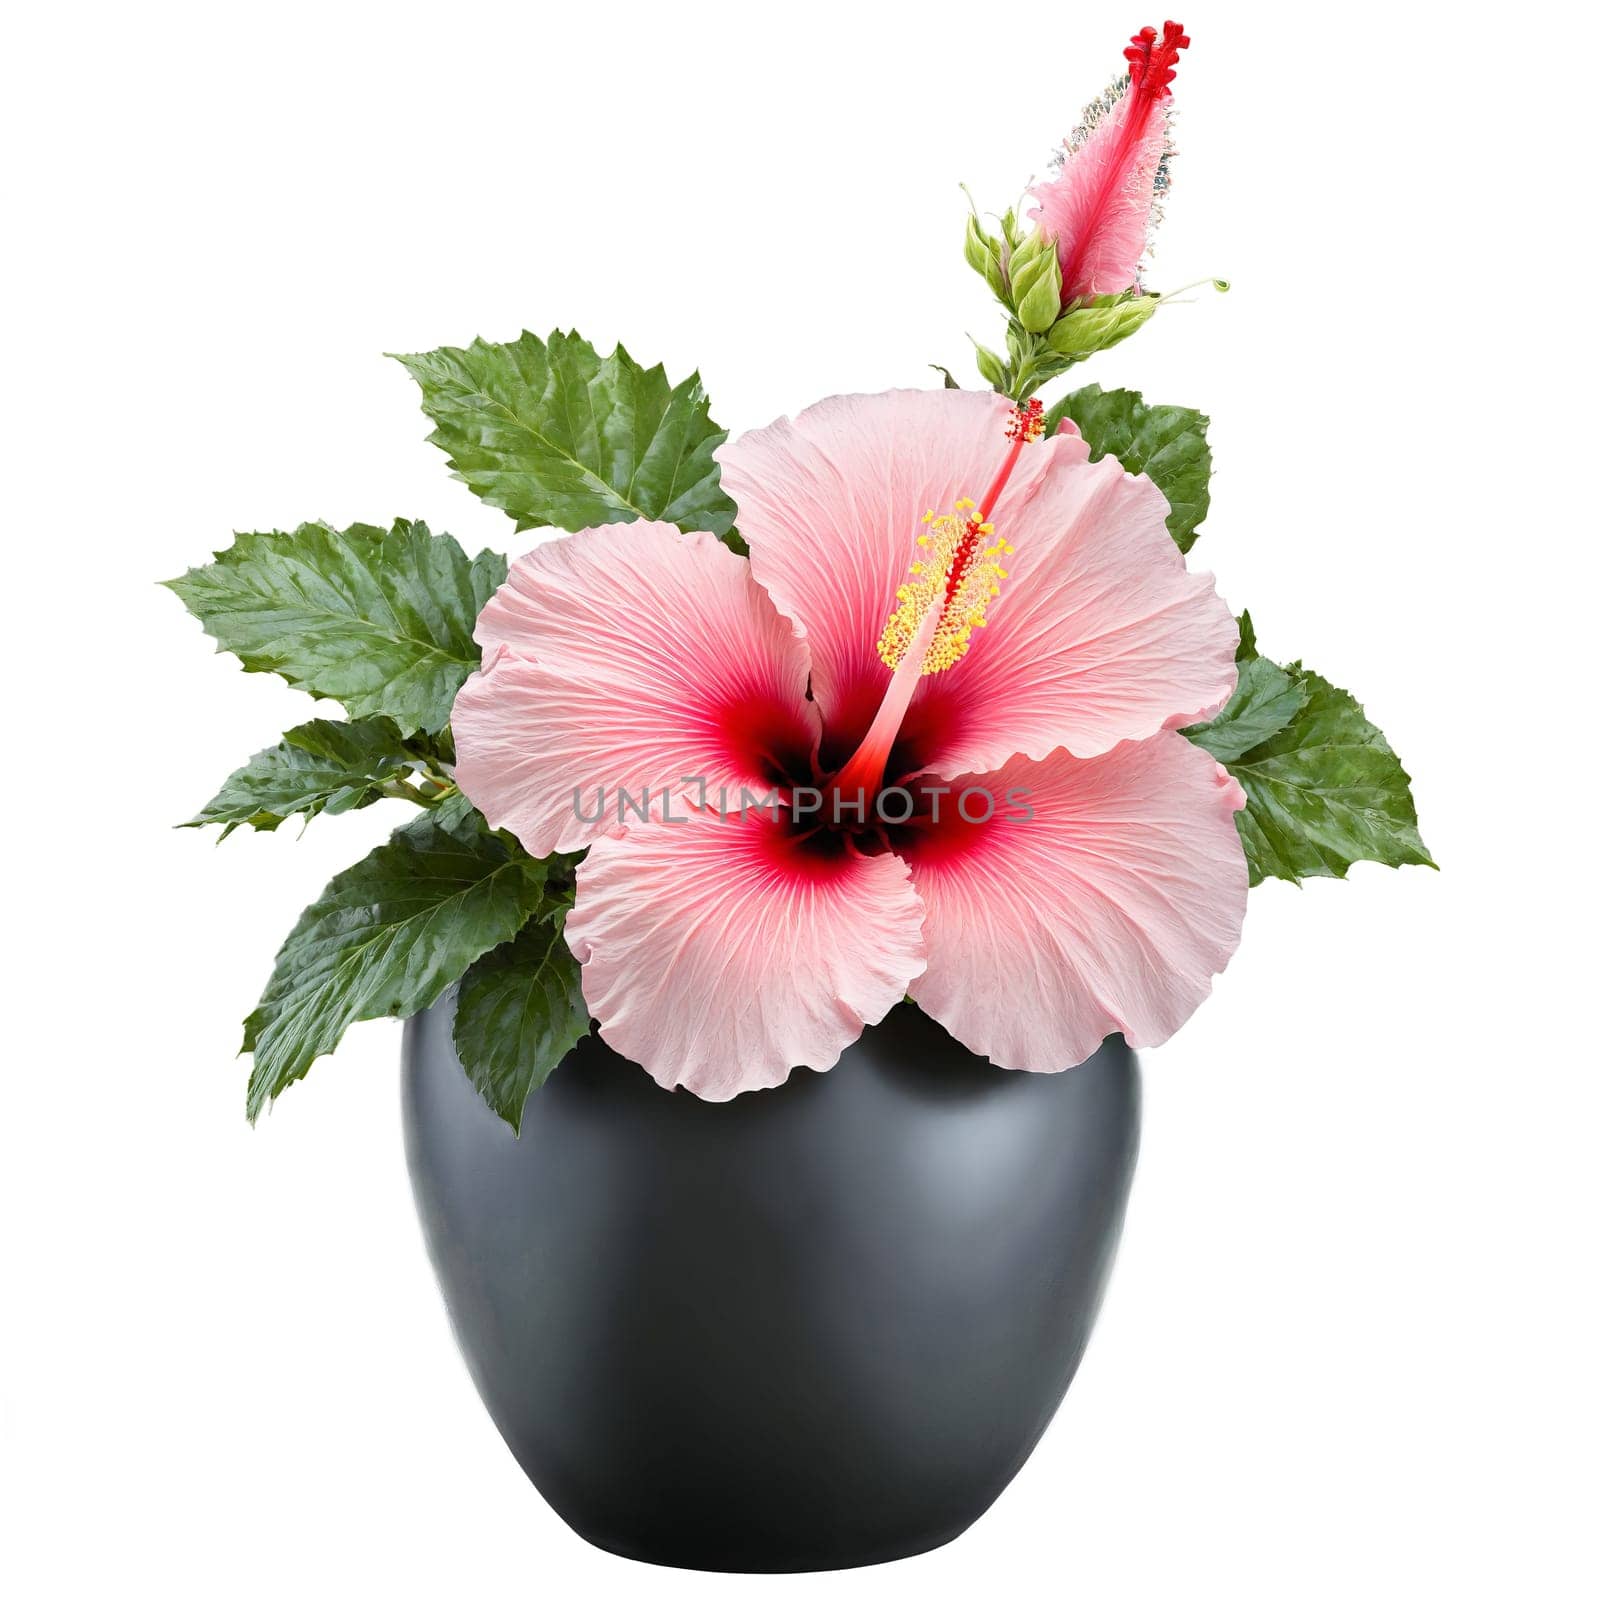 Hibiscus large red and pink tropical flowers in a large black ceramic planter Hibiscus rosa. Plants isolated on transparent background.